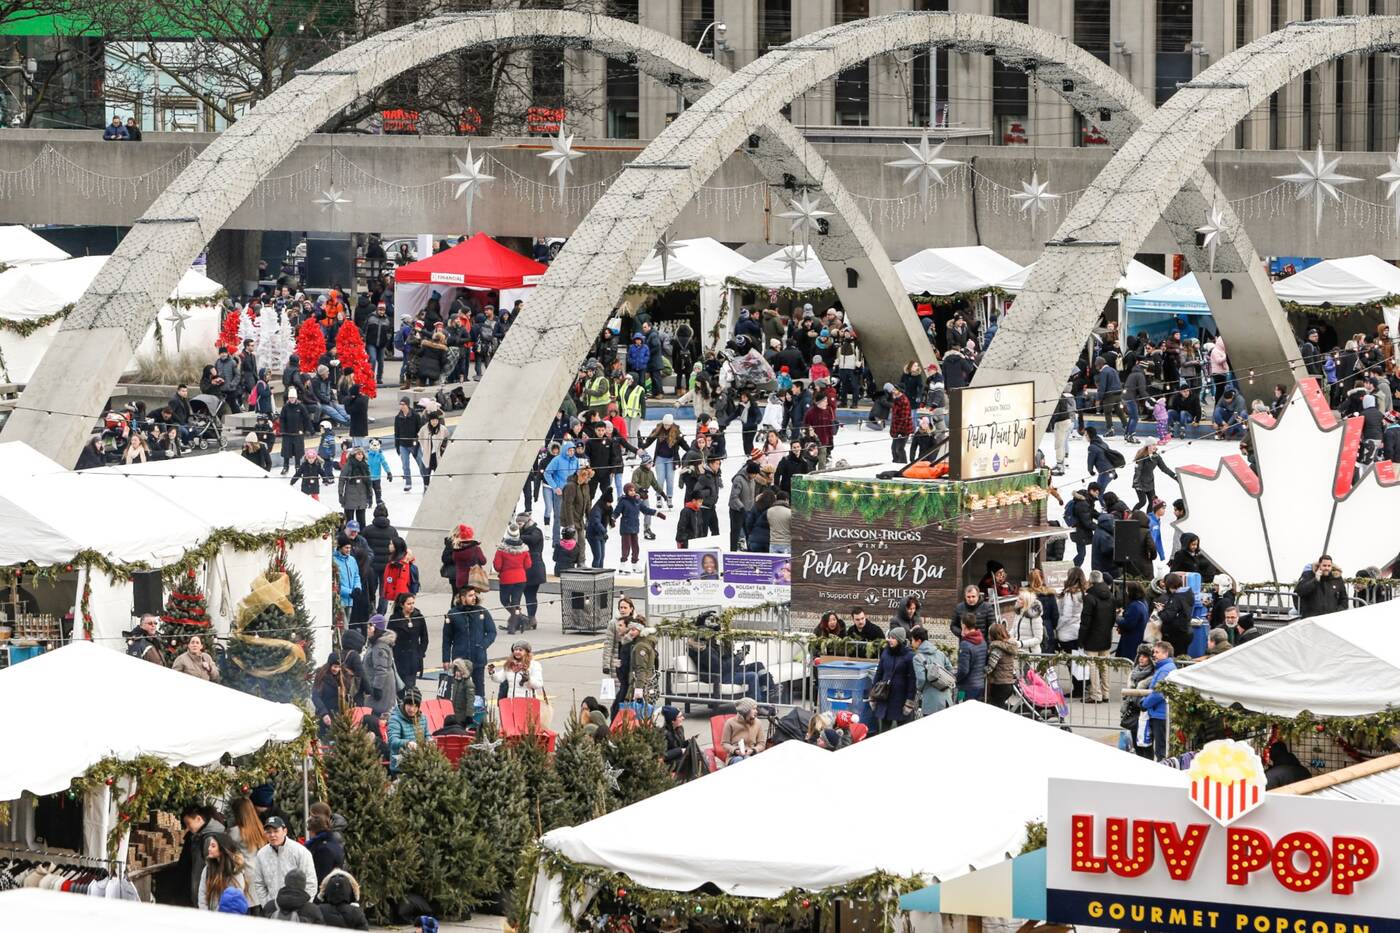 A magical holiday market is coming to downtown Toronto all December long